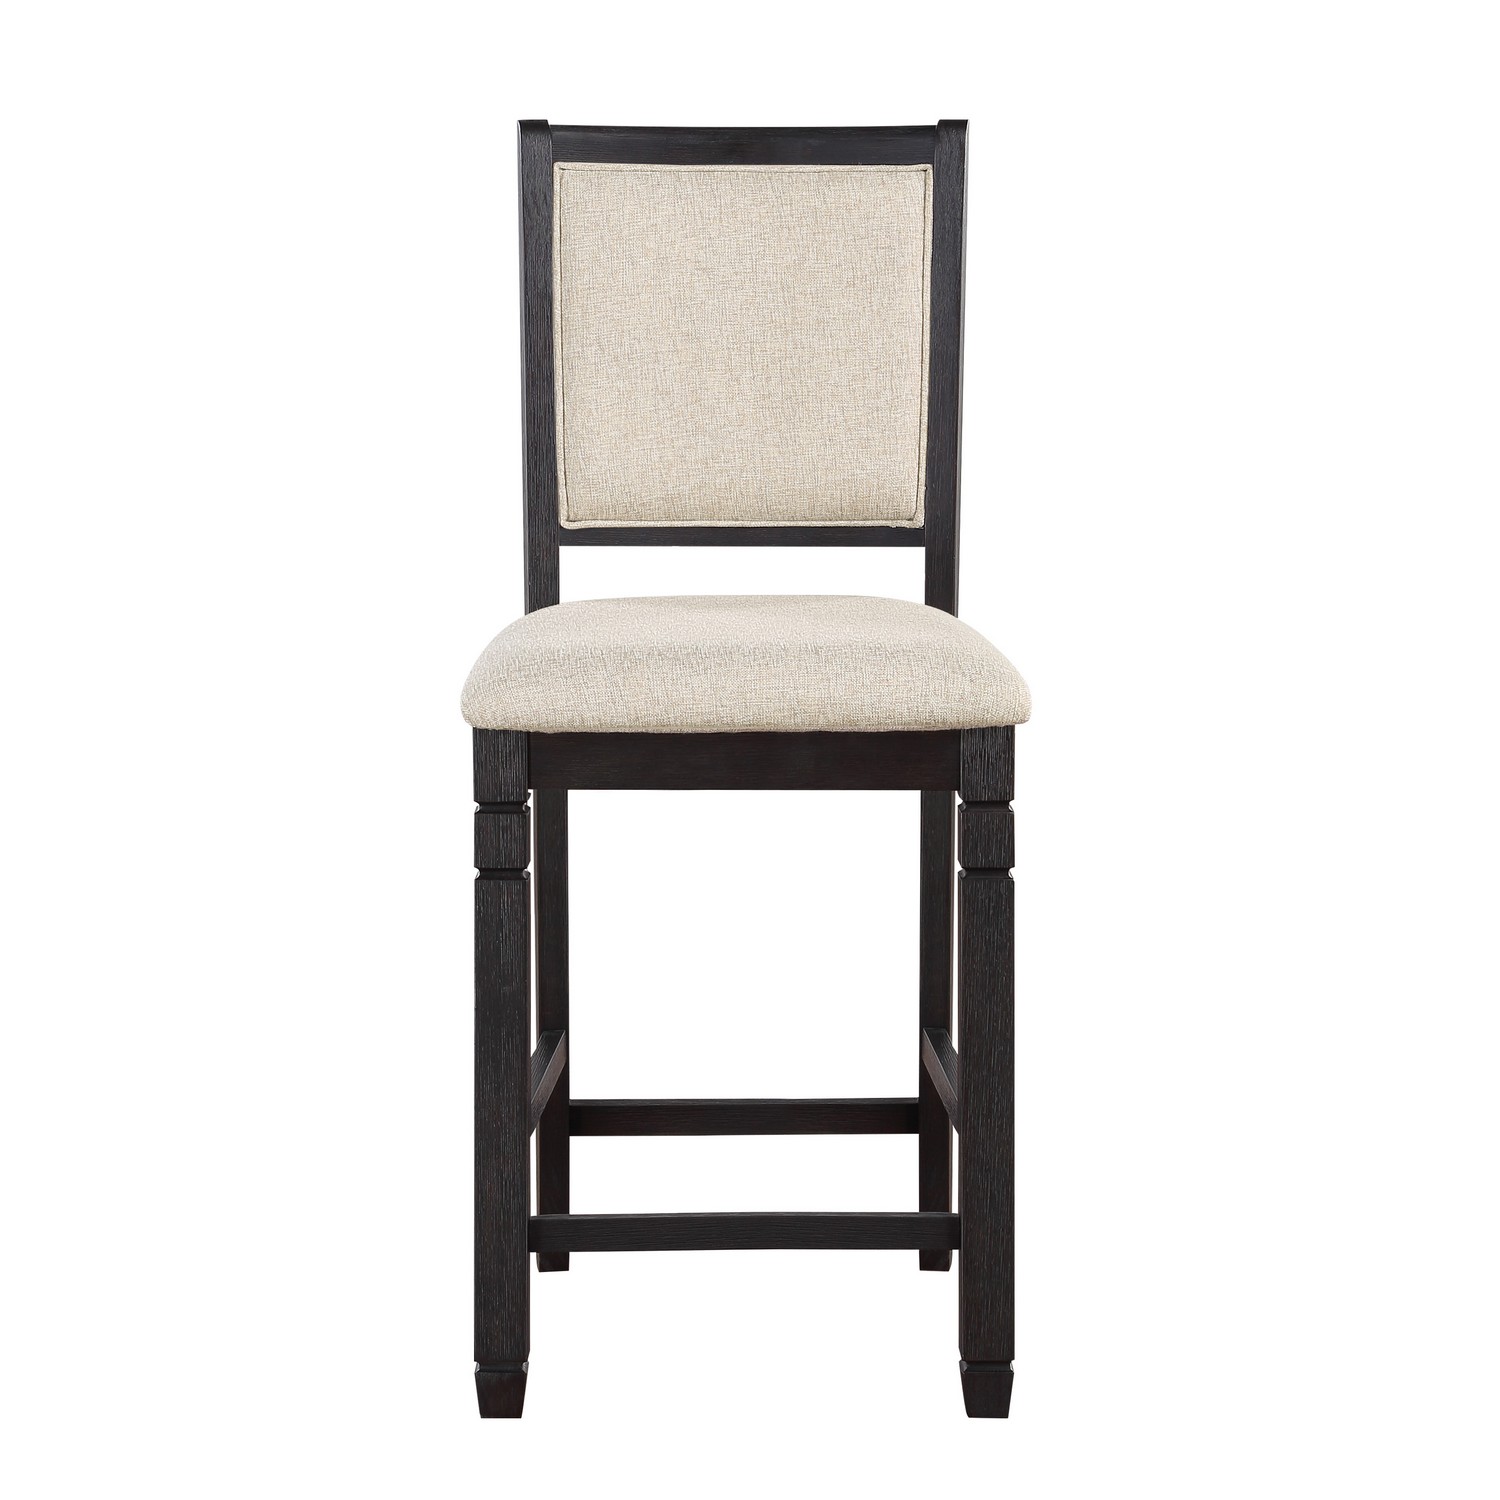 Homelegance Asher Counter Height Chair - Brown/Black